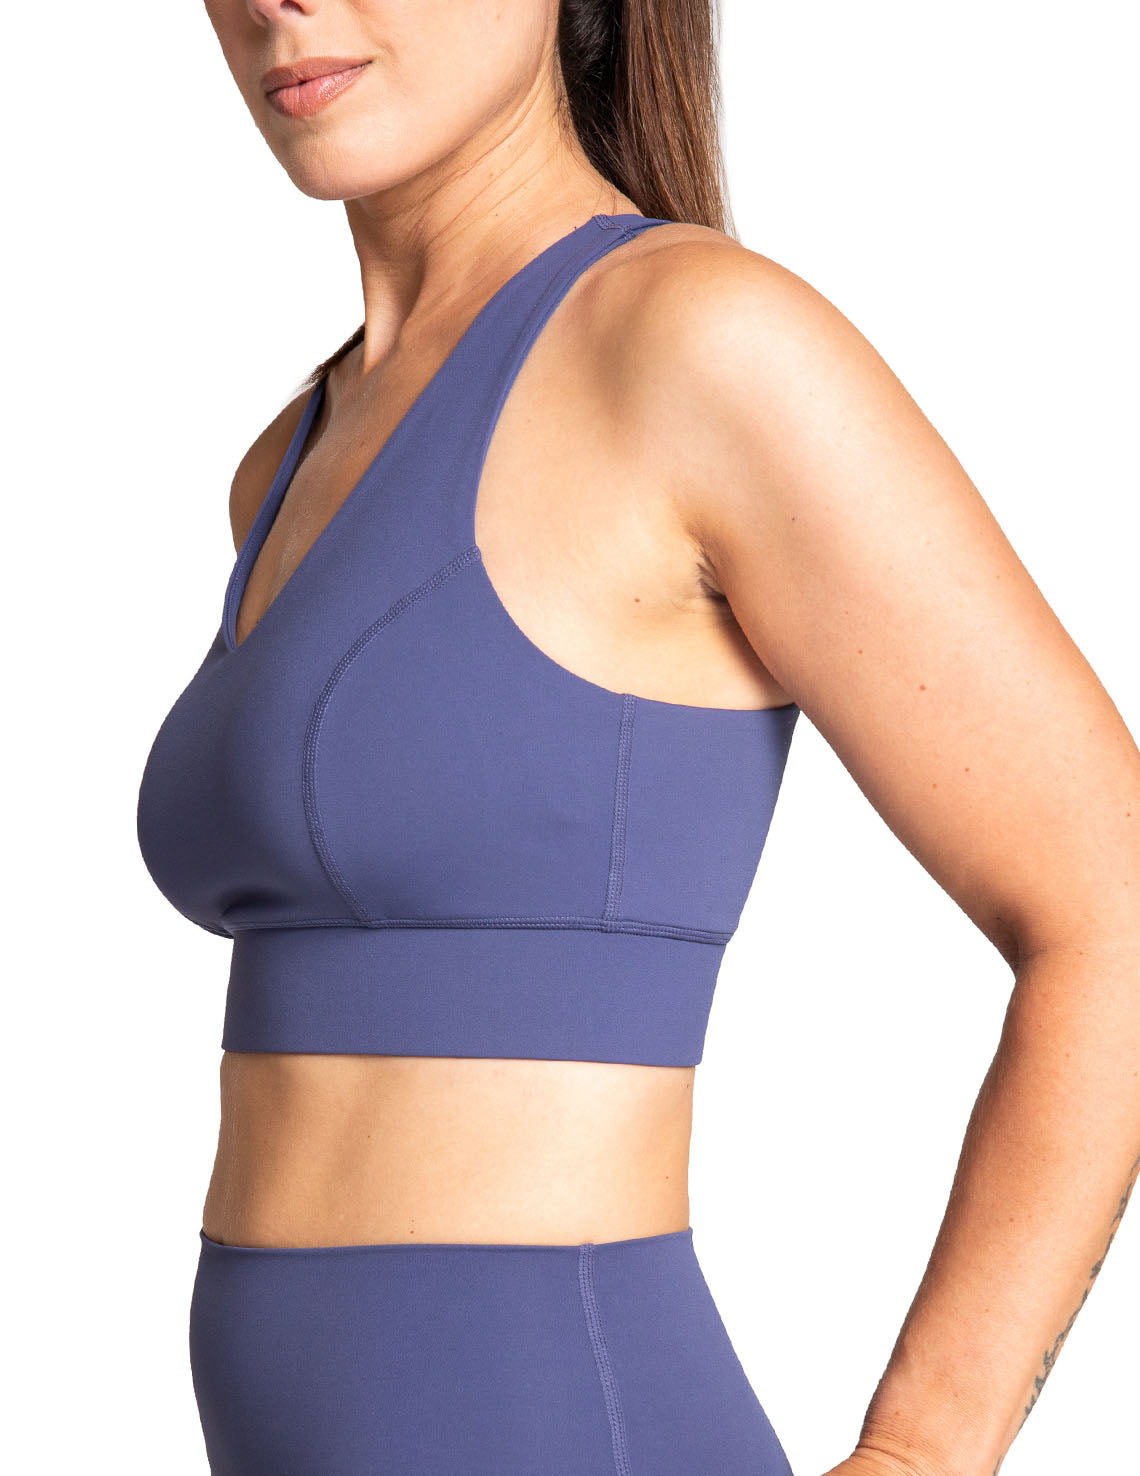 Sports Bra with Hook-and-Eye Closure, Medium to High Support, Navy - Delfin Brands